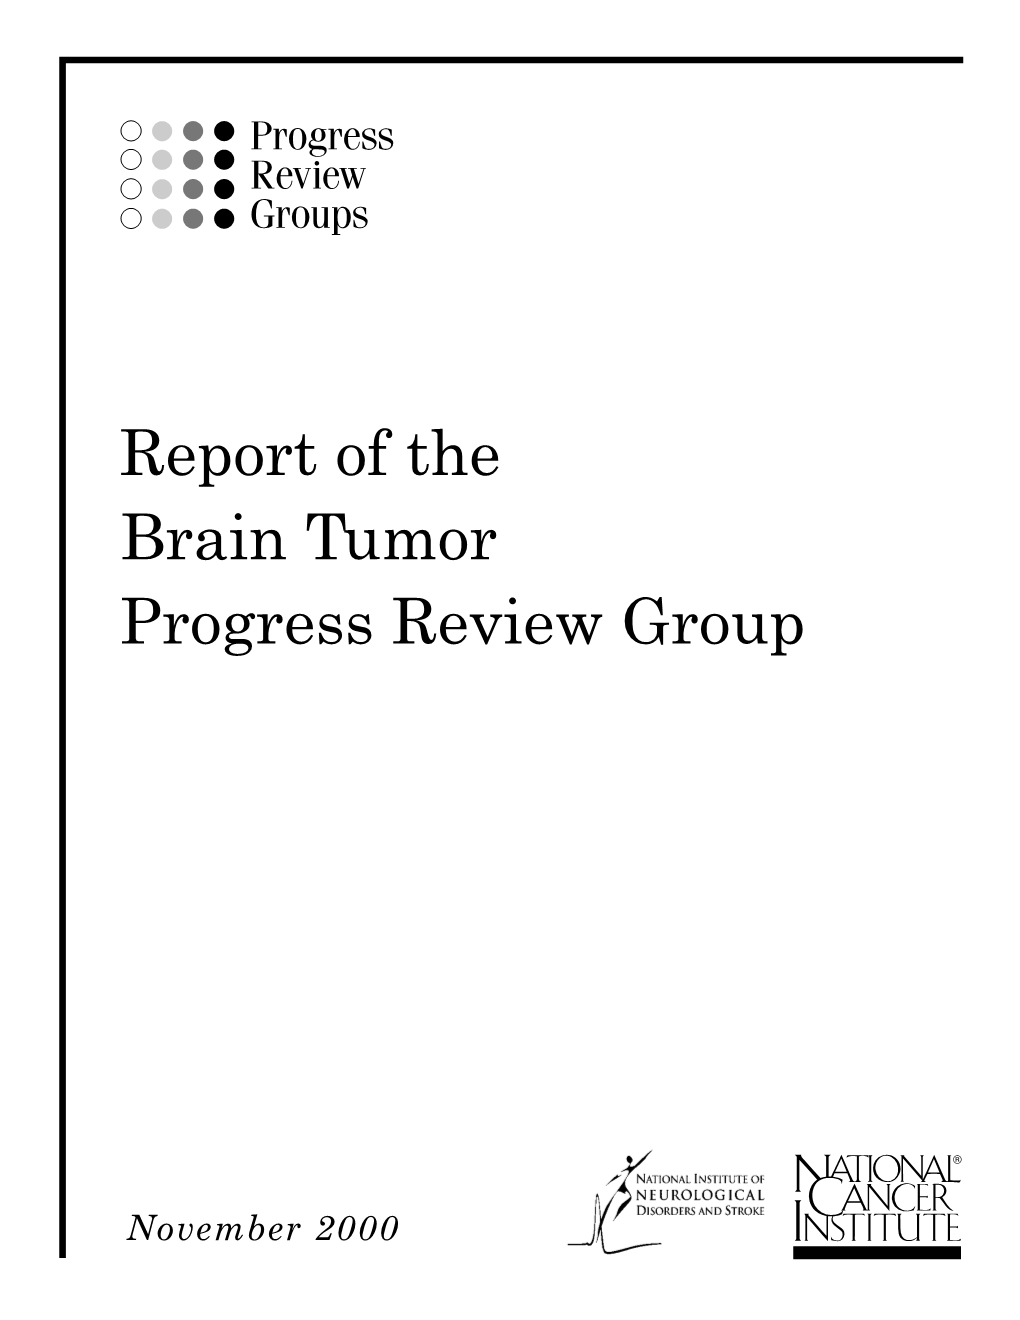 Report of the Brain Tumor Progress Review Group